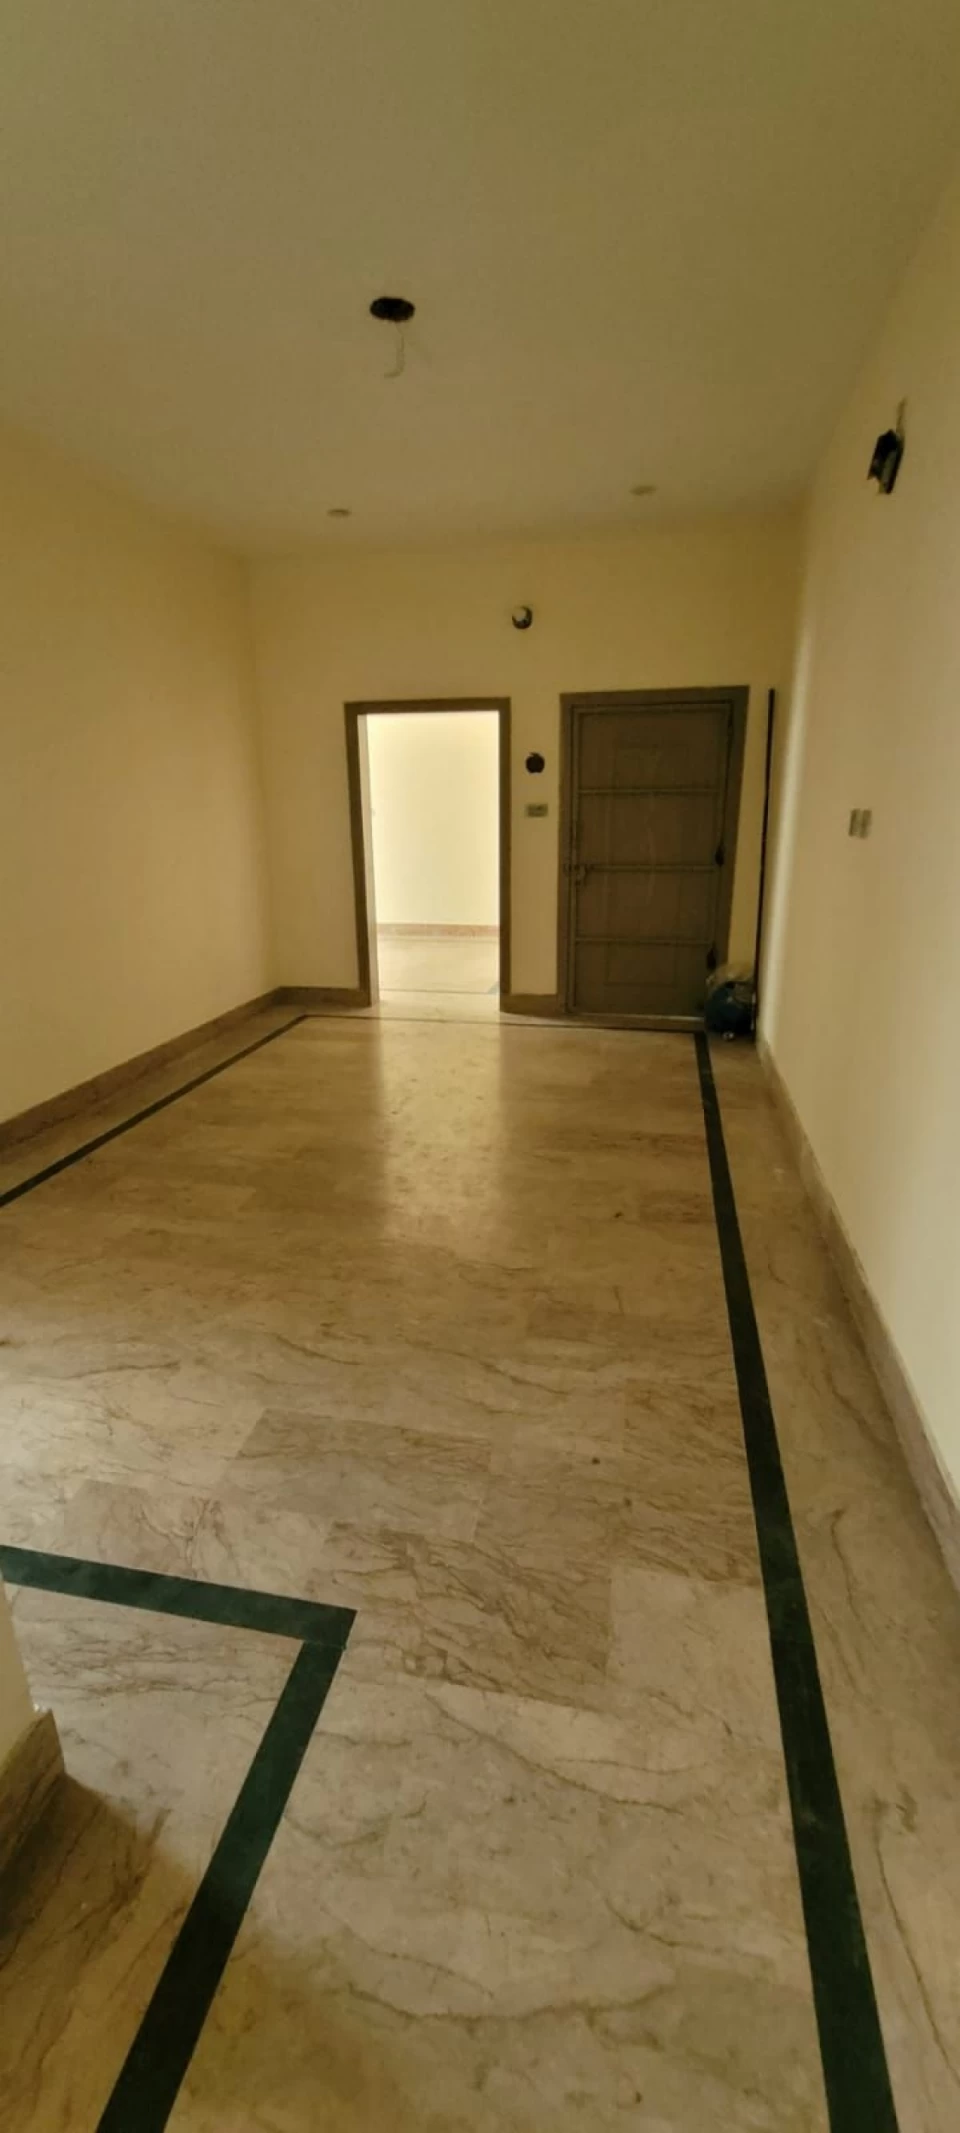 Family flat for rent in jahangir town sialkot, eimanabad road